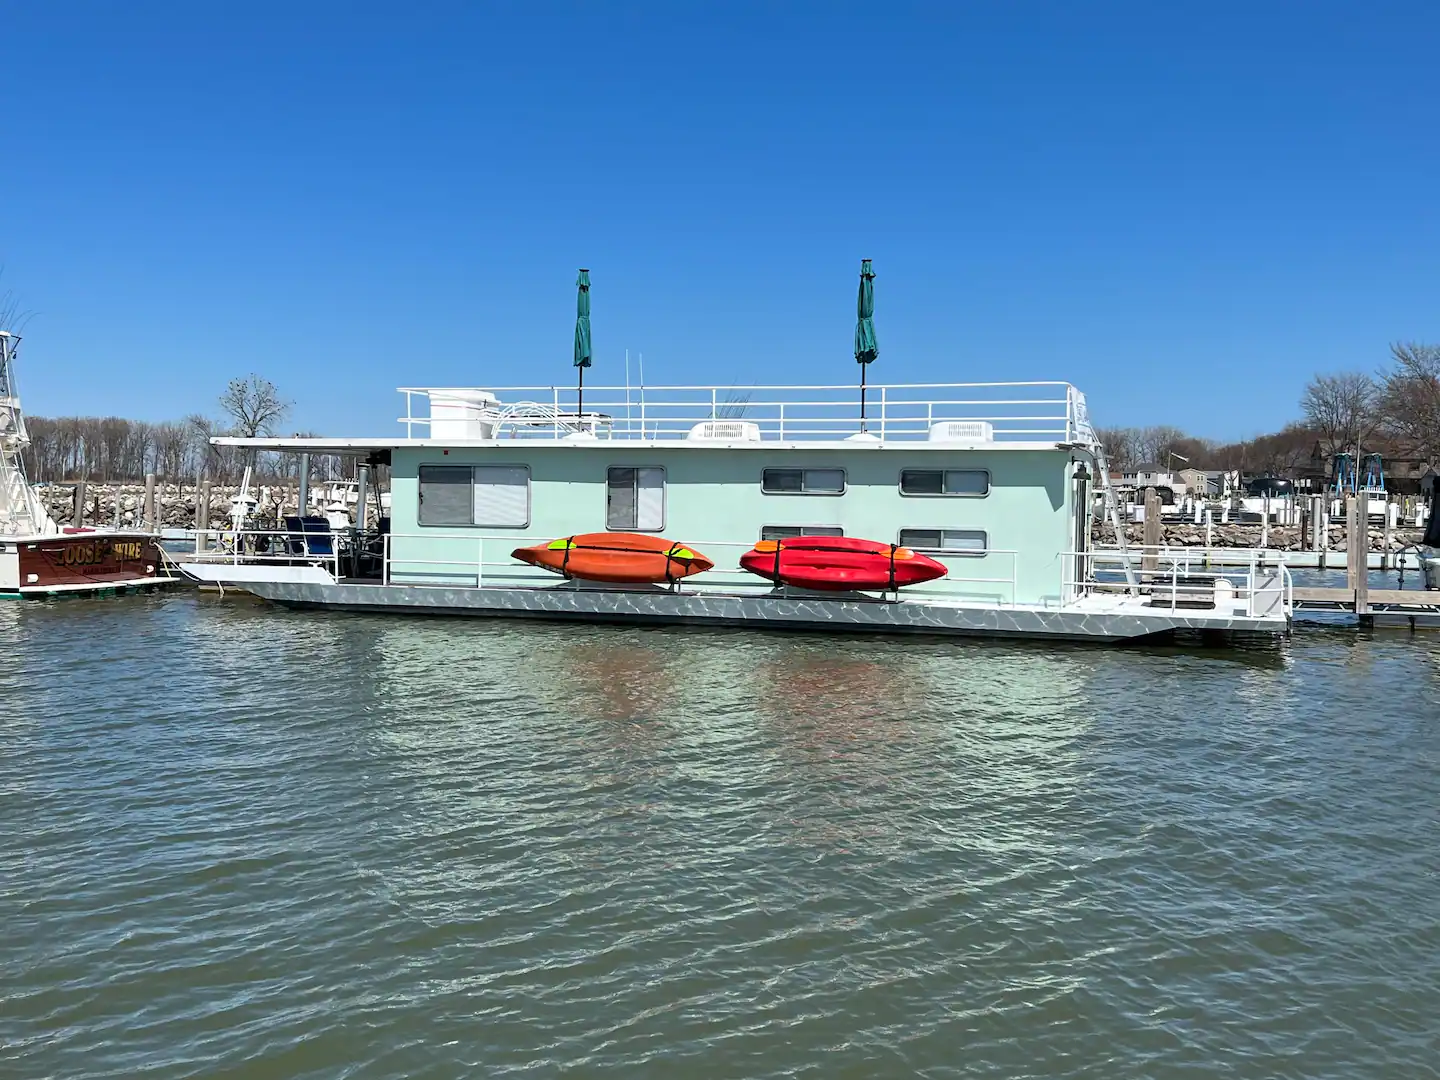 Big Houseboat, one of Ohio's best Airbnbs